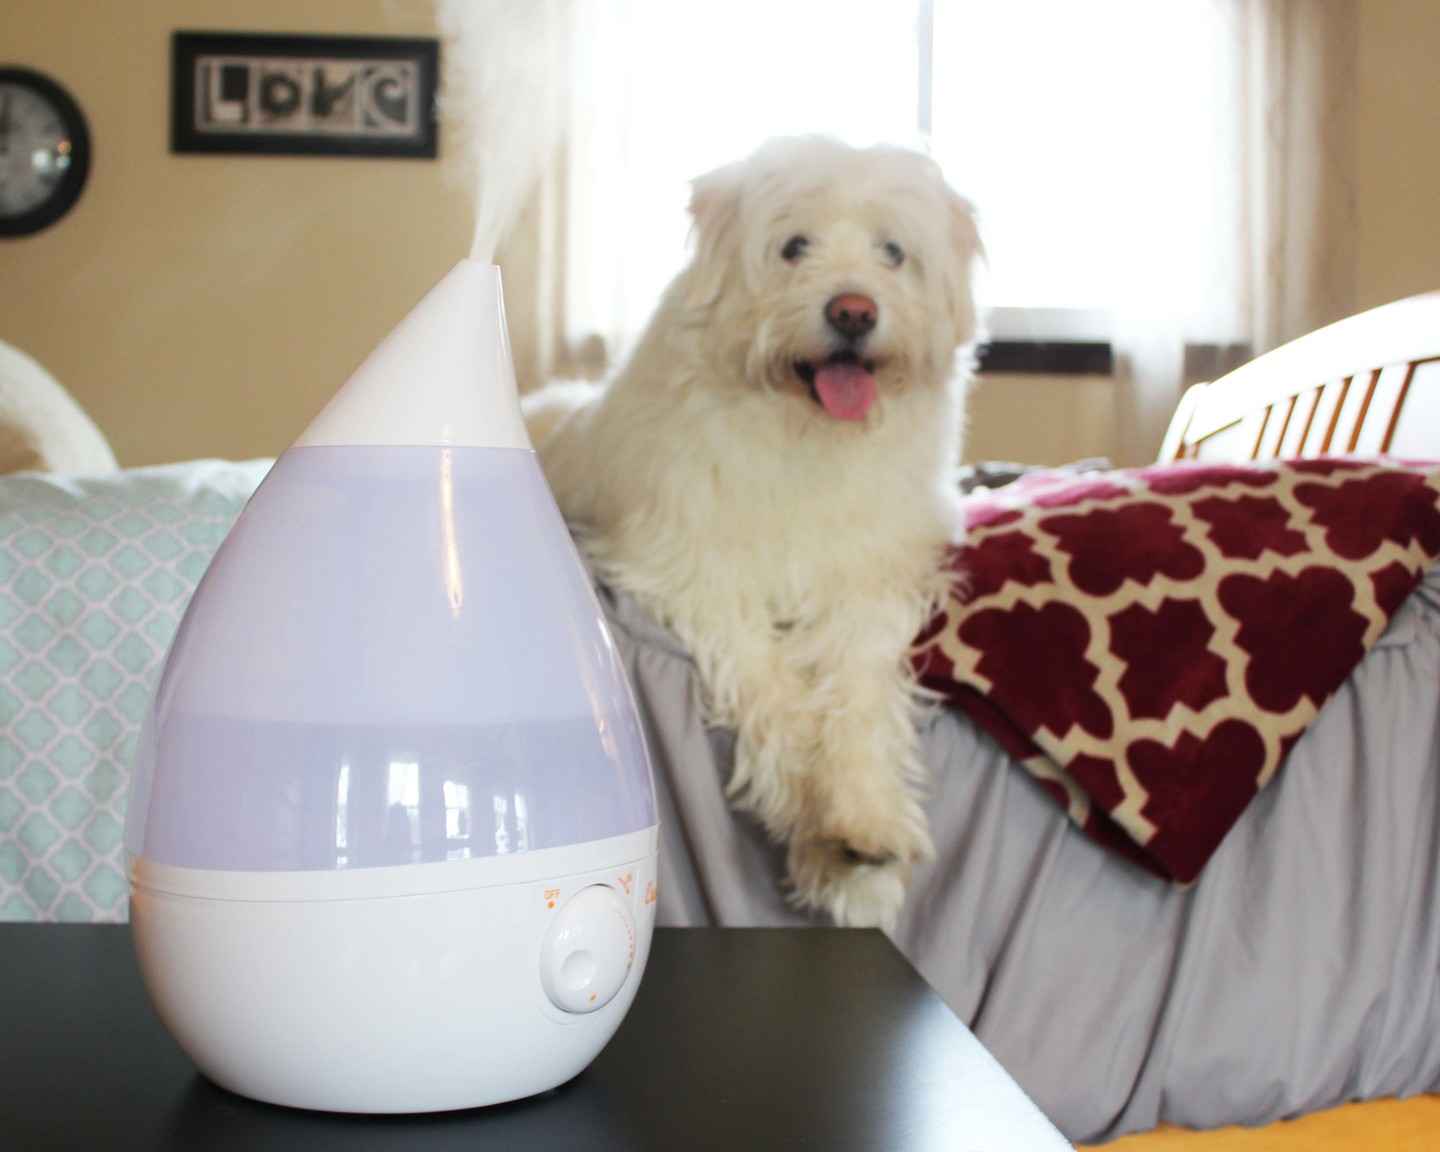 Crane: Design for Better Living Prepping Puppy for Your Baby